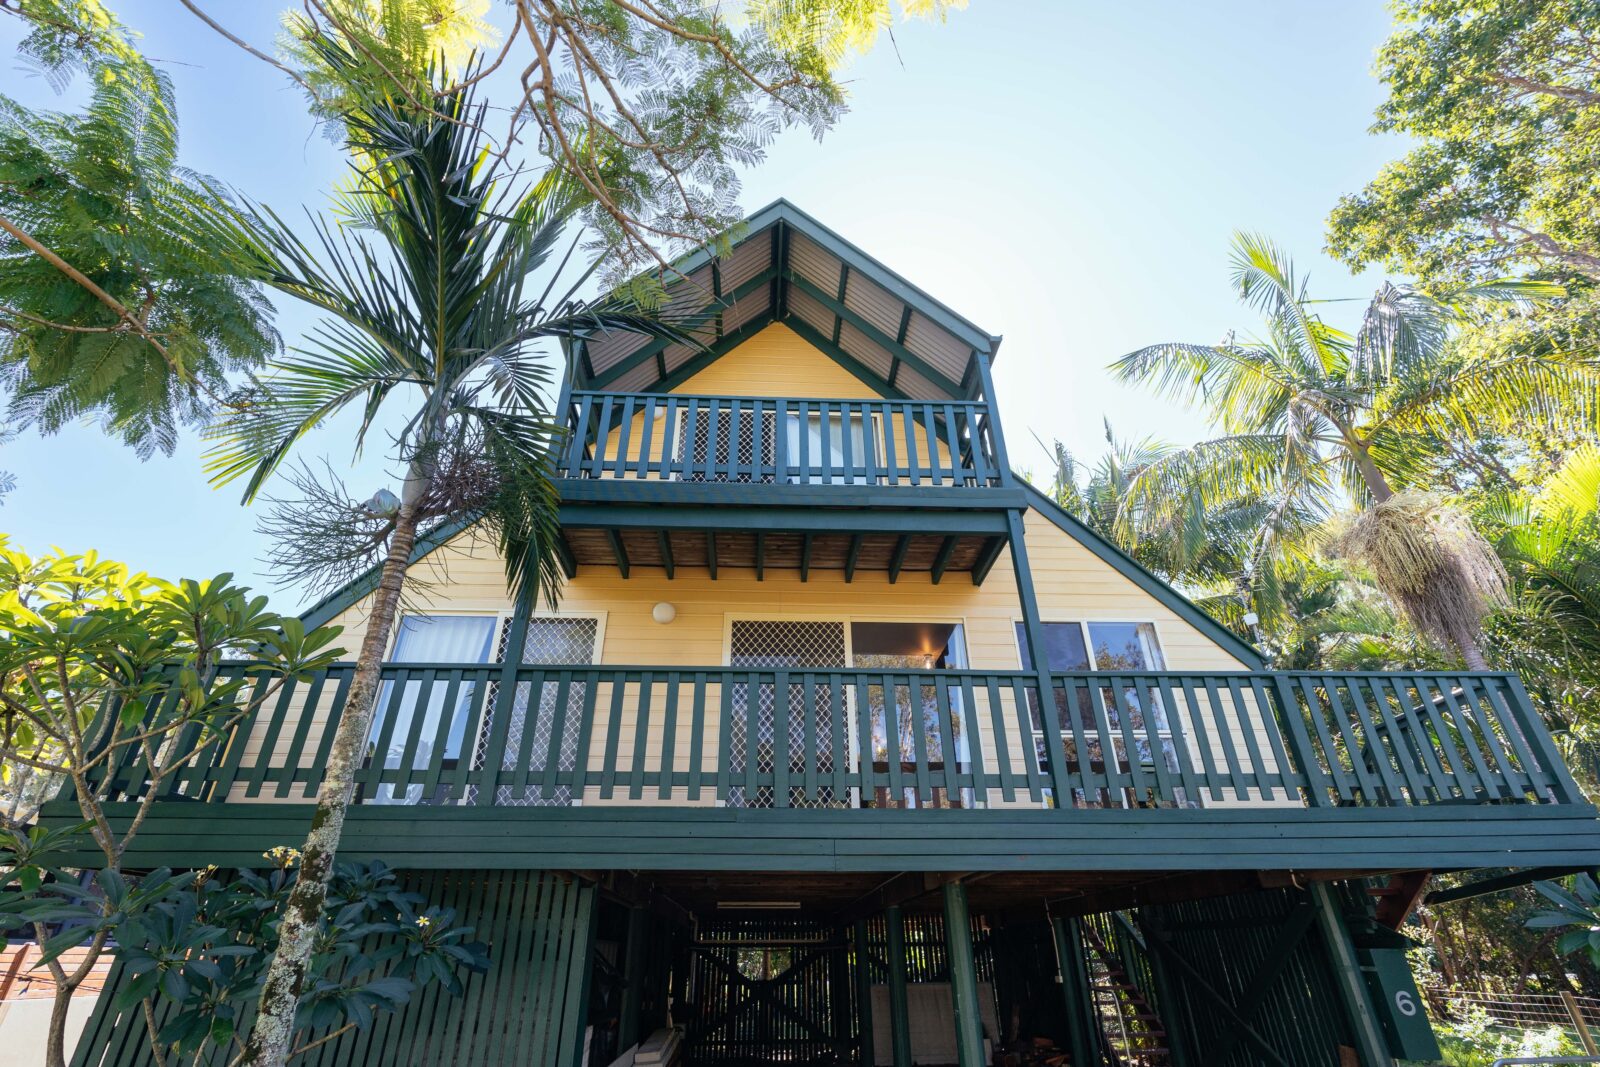 A yellow A-Frame house with green trim sits amongst tall palm trees with a blue sky